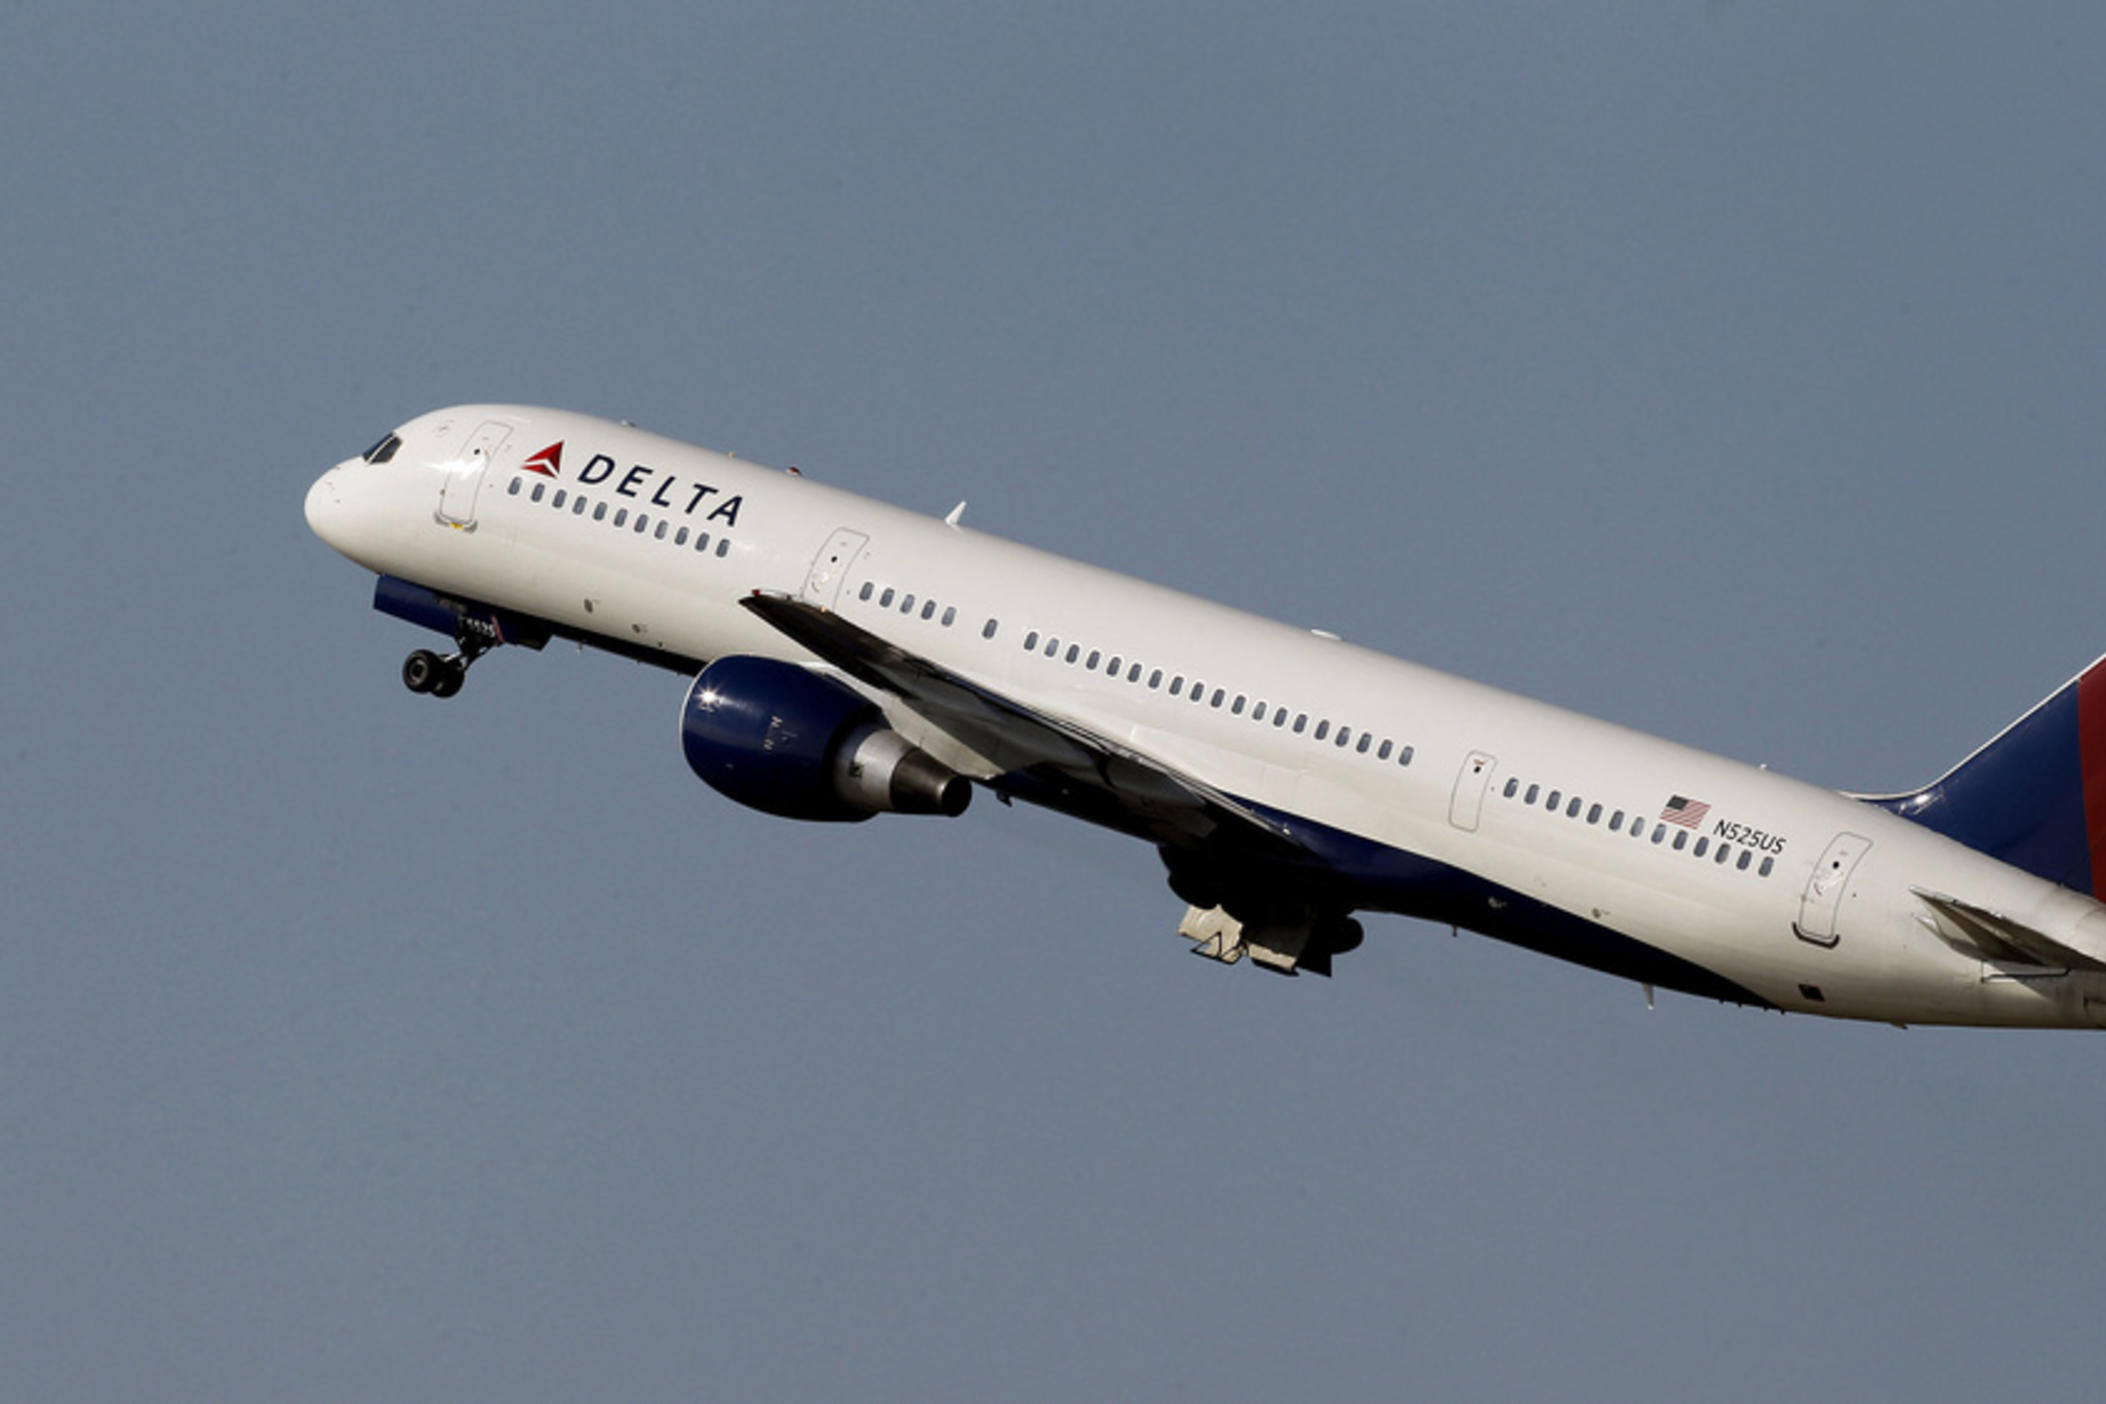  A Delta Air Lines Boeing 757 taking off in Tampa, Fla. on Jan. 20, 2011. A Boeing 757 jet operated by Delta Air Lines lost a nose wheel while preparing for takeoff from Atlanta over the weekend, according to the Federal Aviation Administration, which is investigating the incident. 